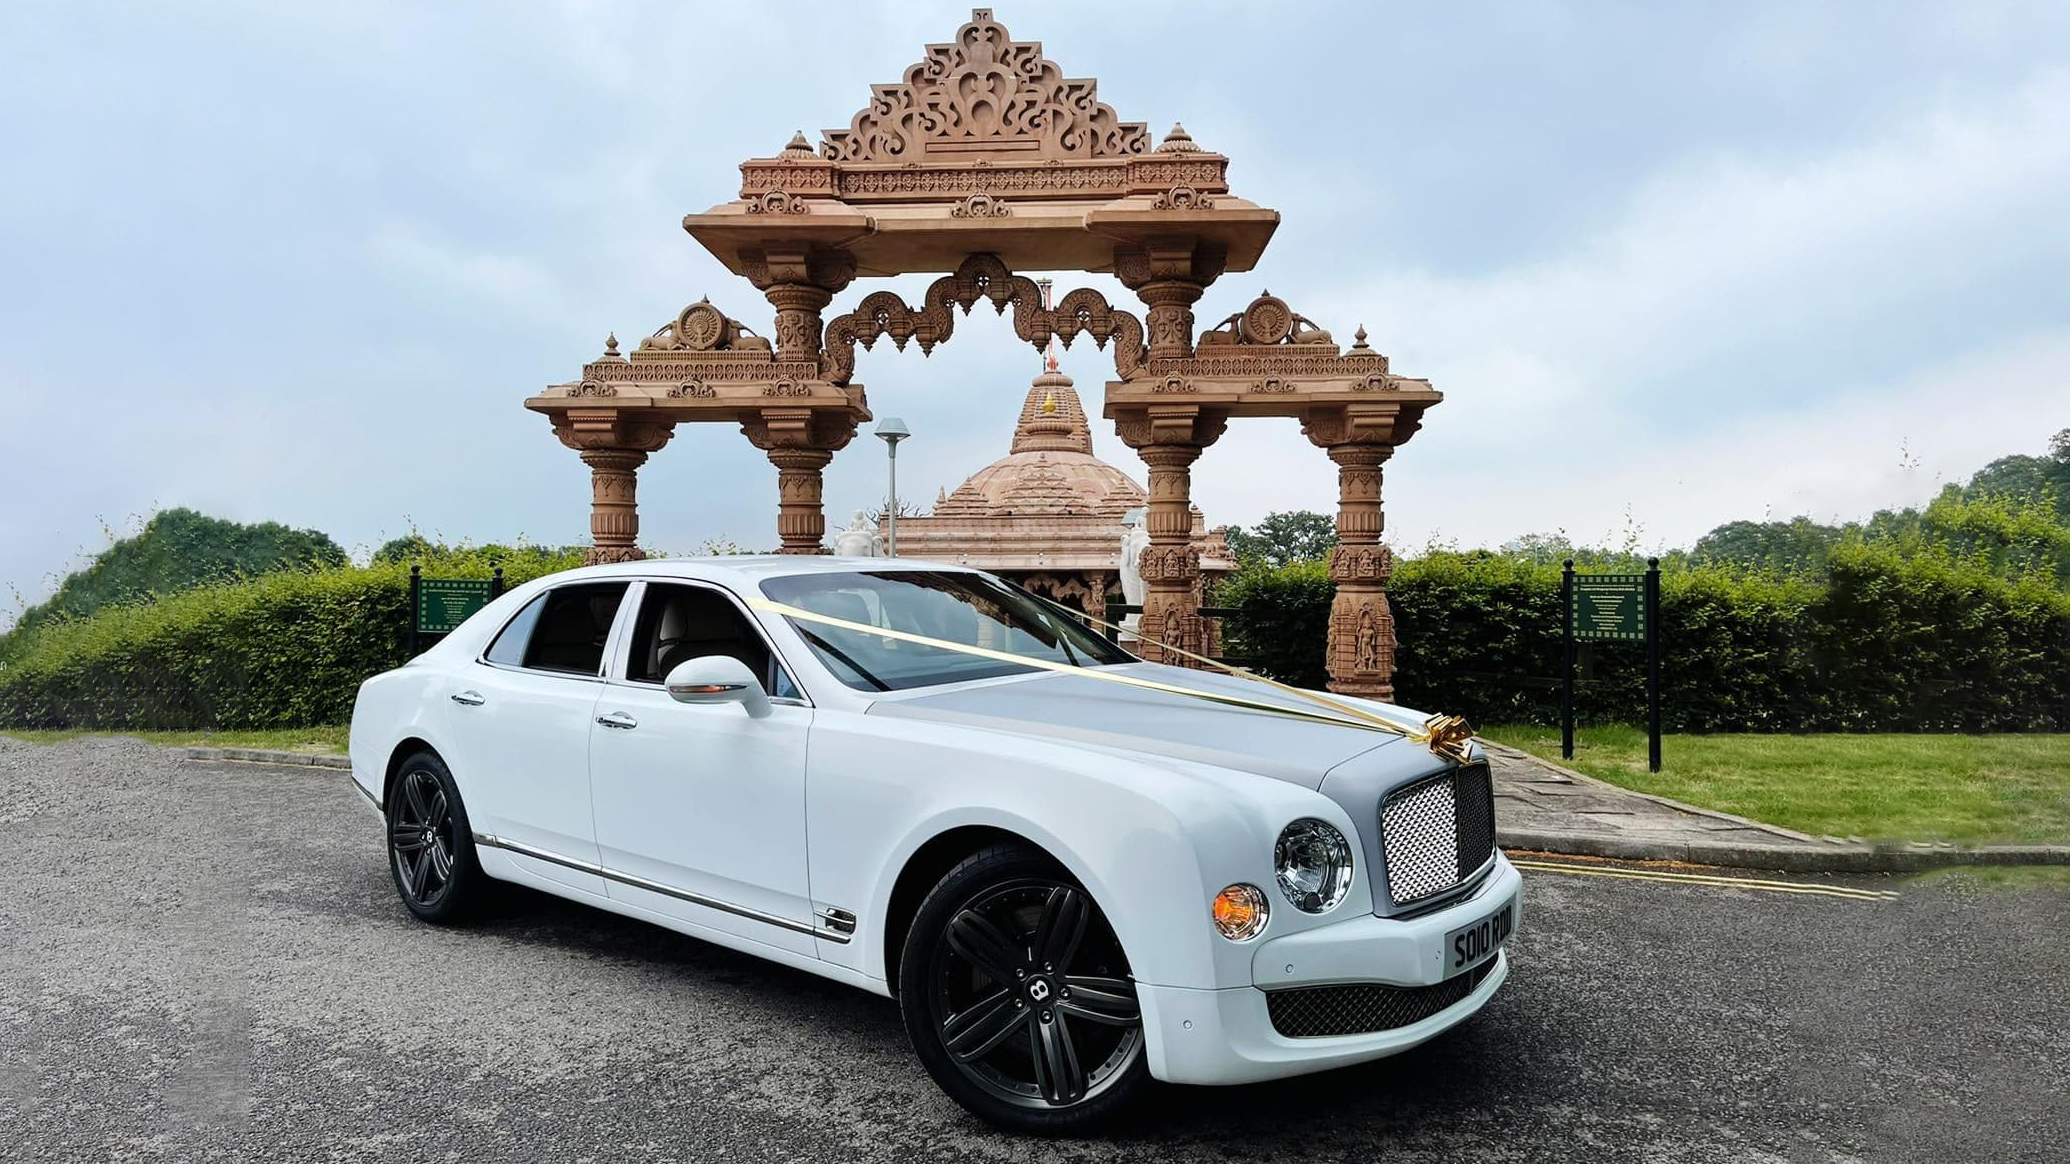 Modern Bentley Mulsanne with Black alloy wheels and Gold ribbons park in front of an Asian Temple in Leighton Buzzard.